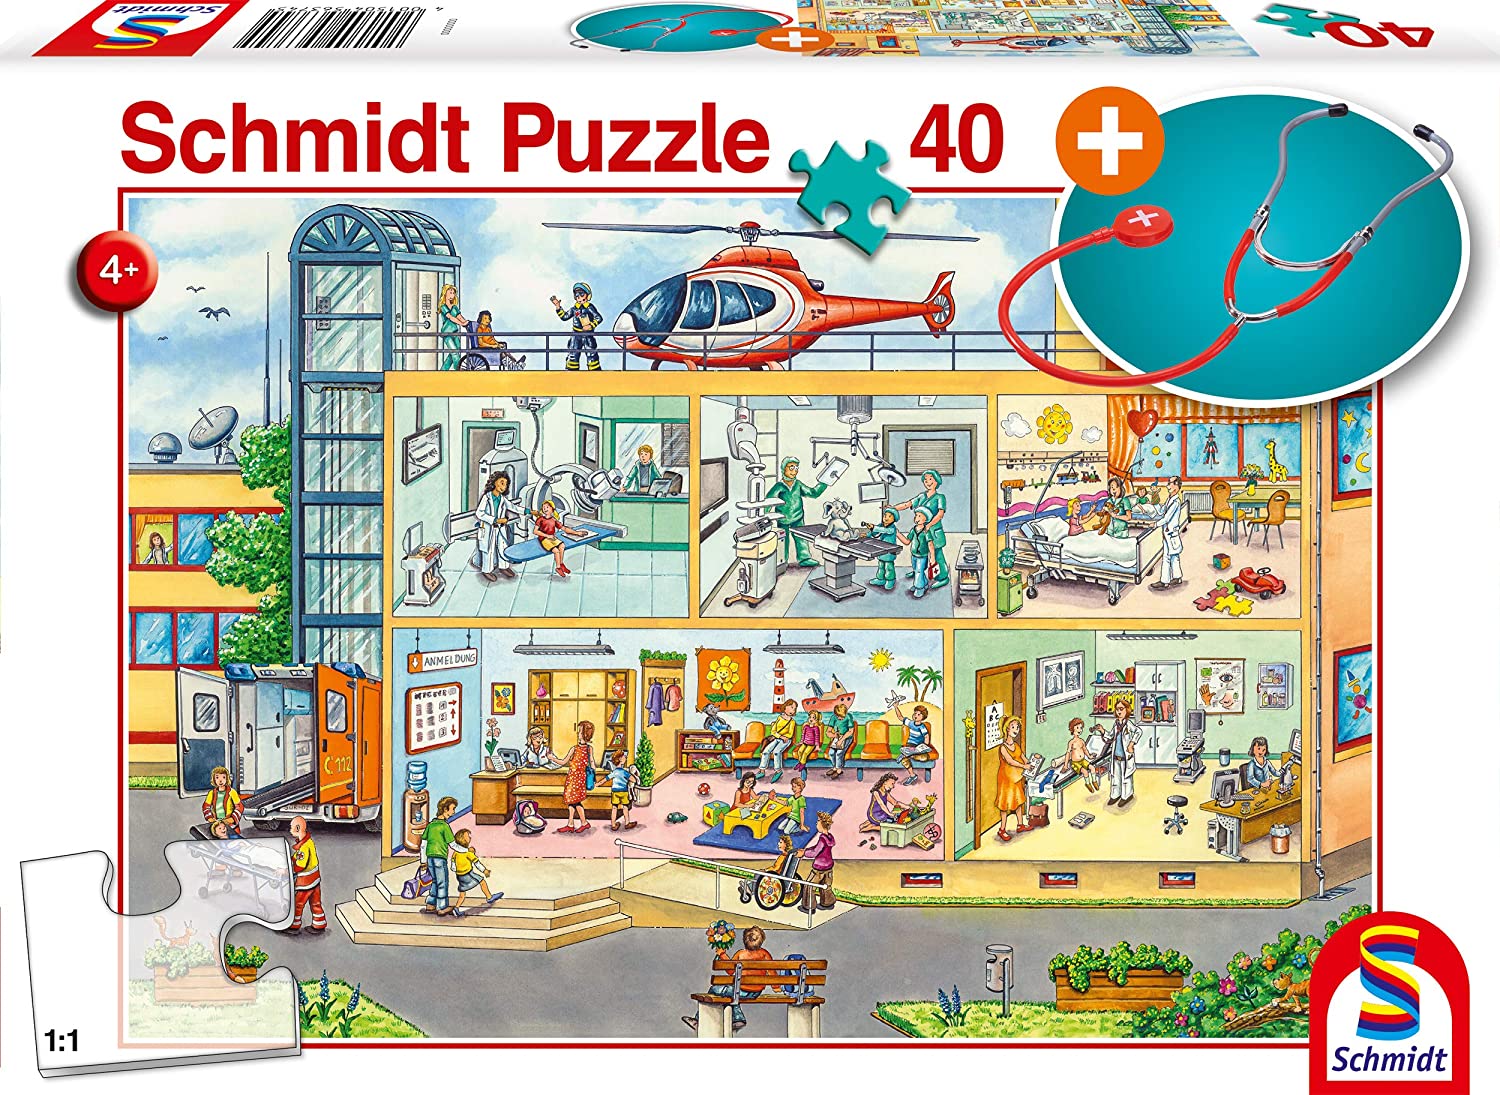 Schmidt Spiele 56374 Children's Hospital Puzzle 40 Pieces with Stethoscope, Colourful